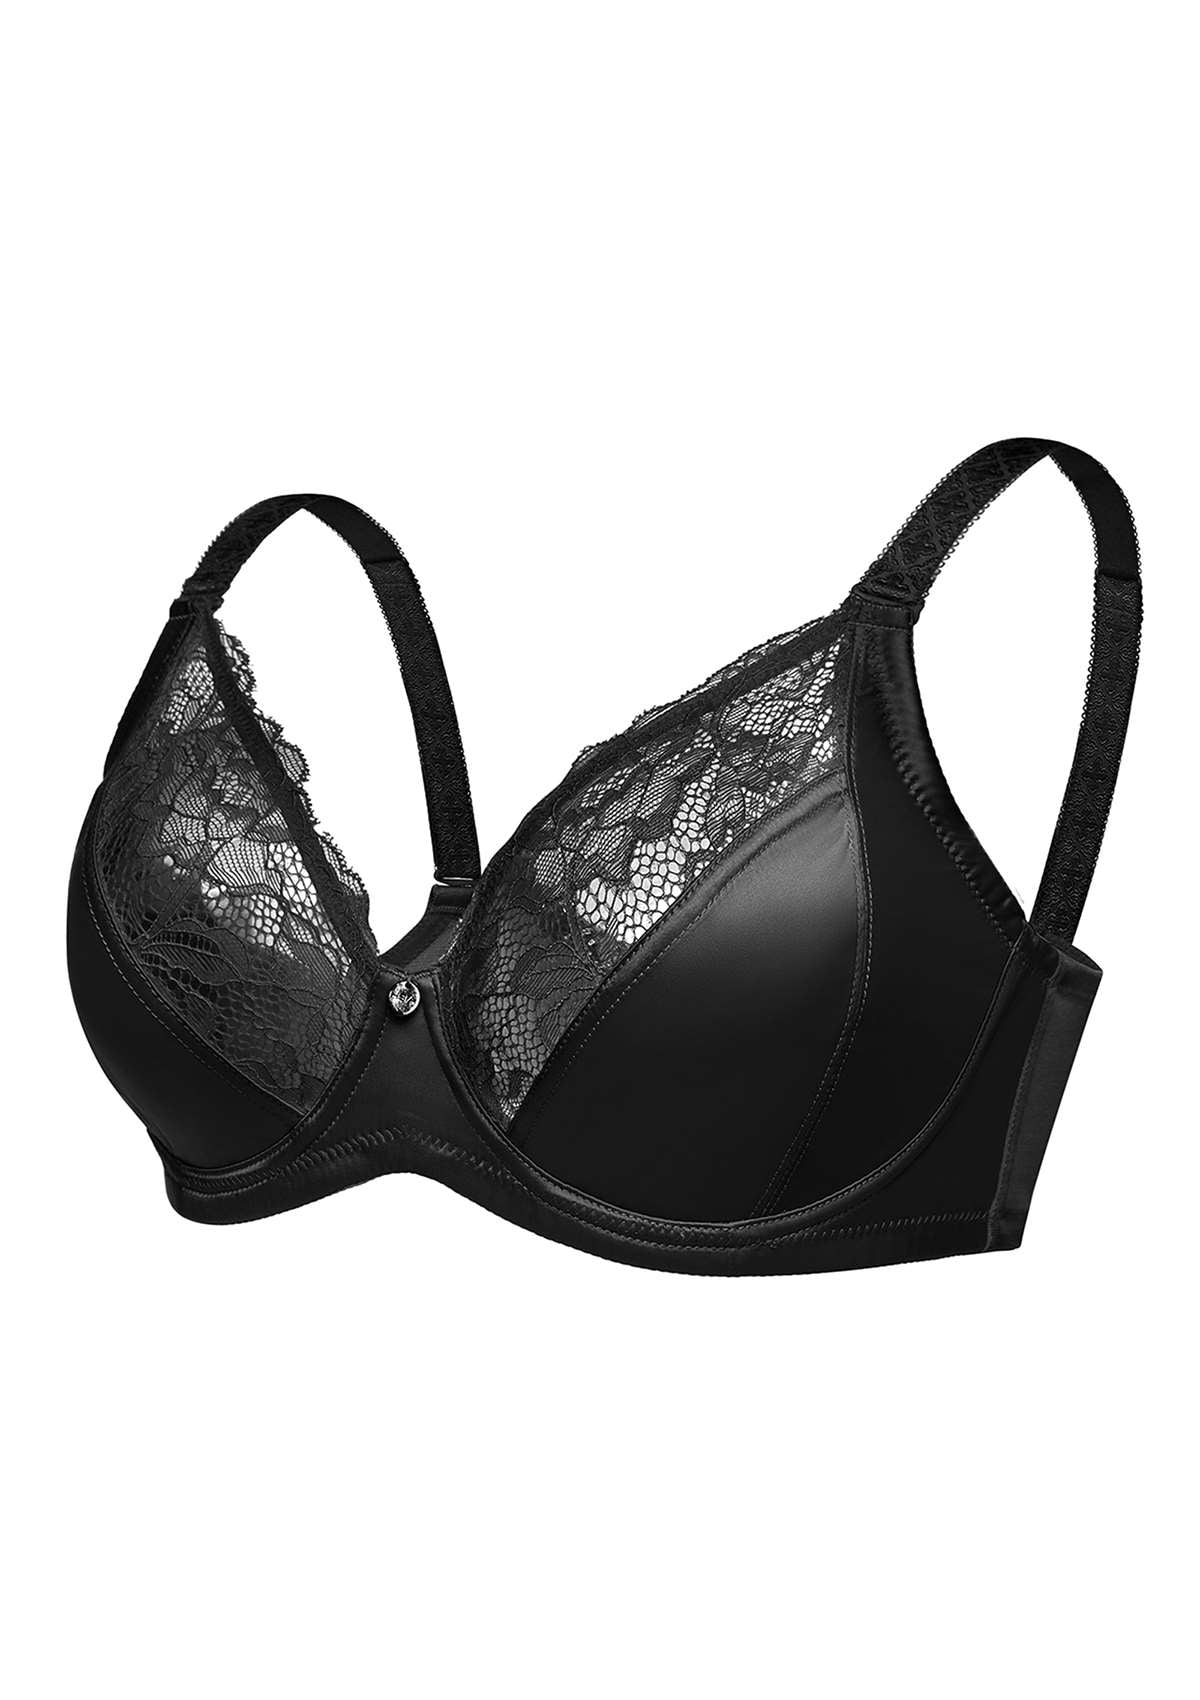 HSIA Foxy Satin Silky Full Coverage Underwire Bra With Floral Lace Trim - Black / 42 / C